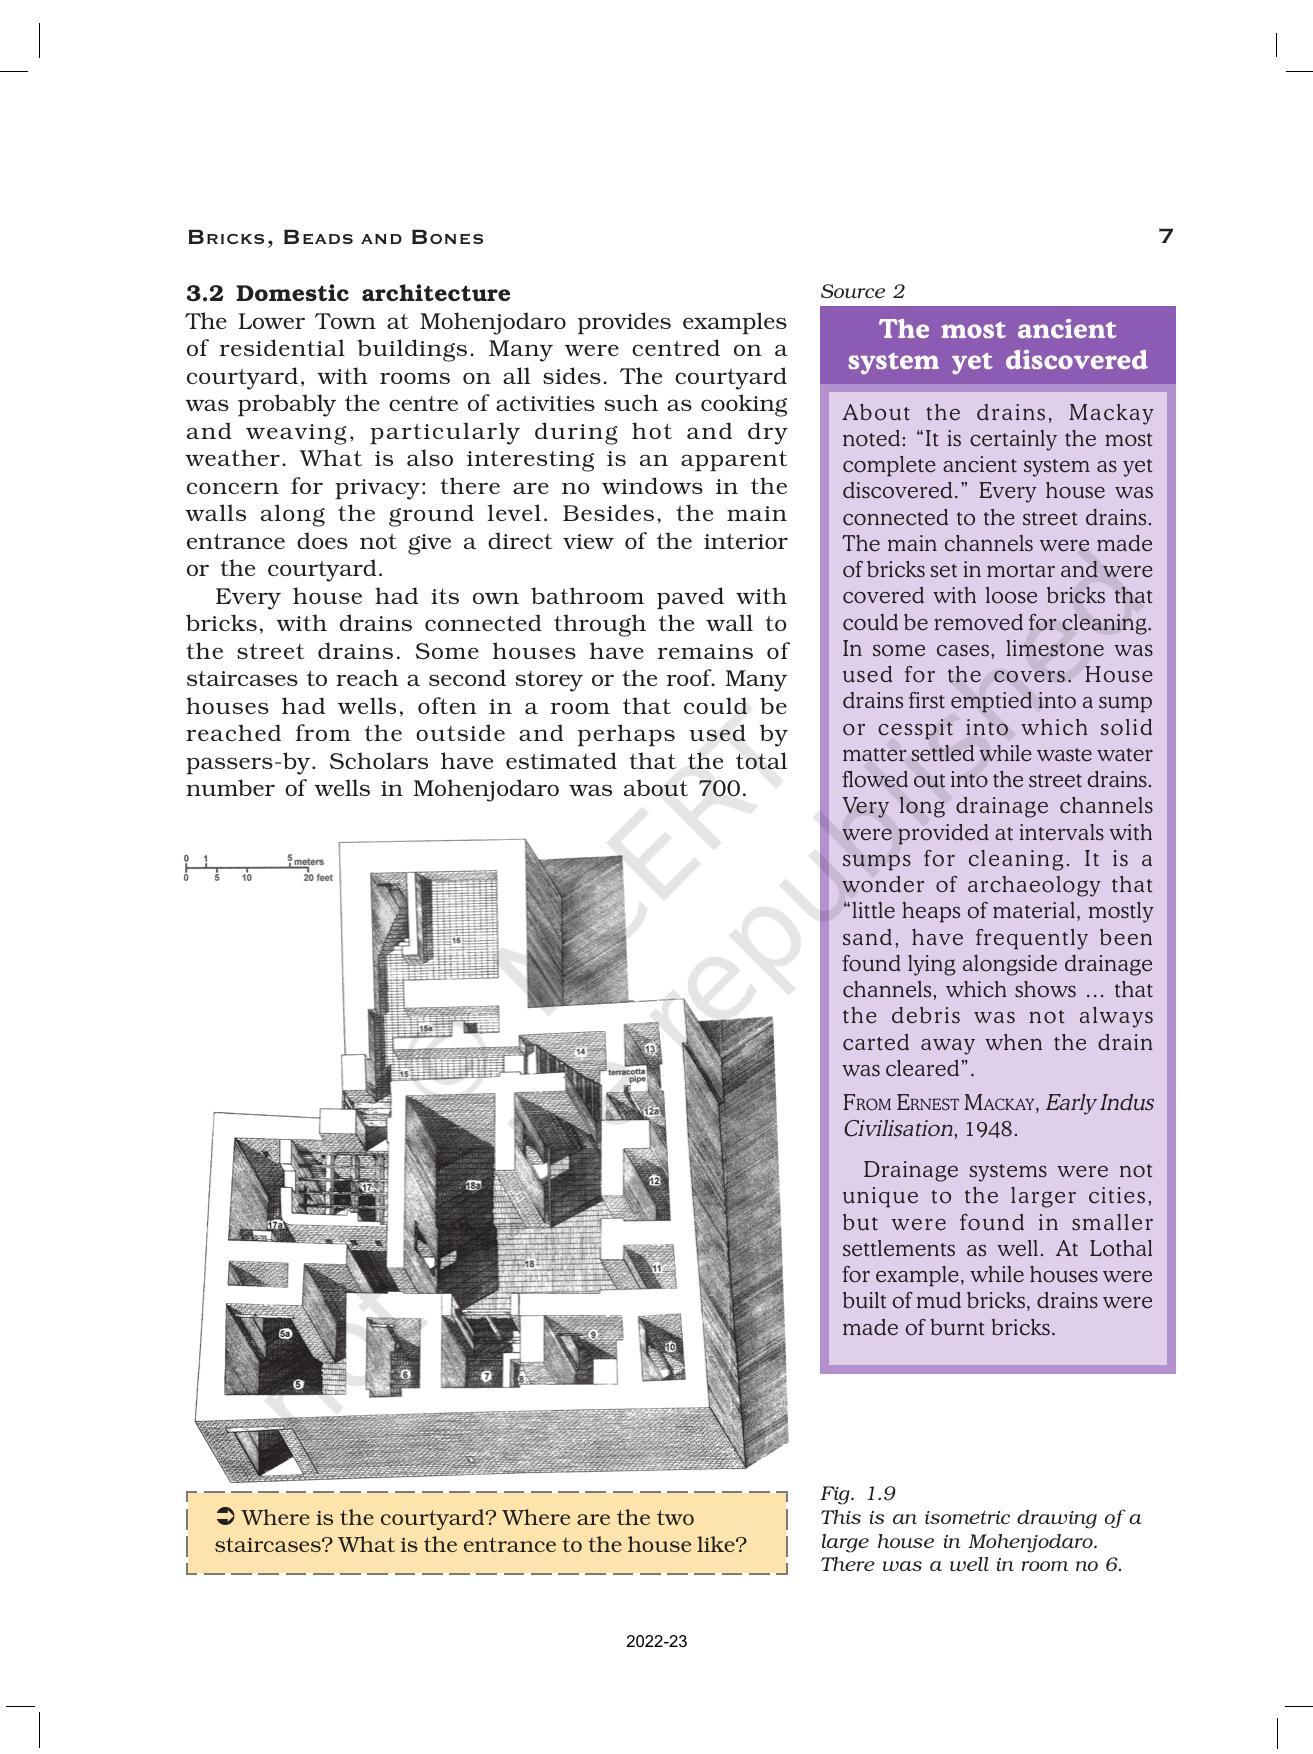 NCERT Book for Class 12 History (Part-1) Chapter 1 Bricks, Beads, and Bones - Page 7